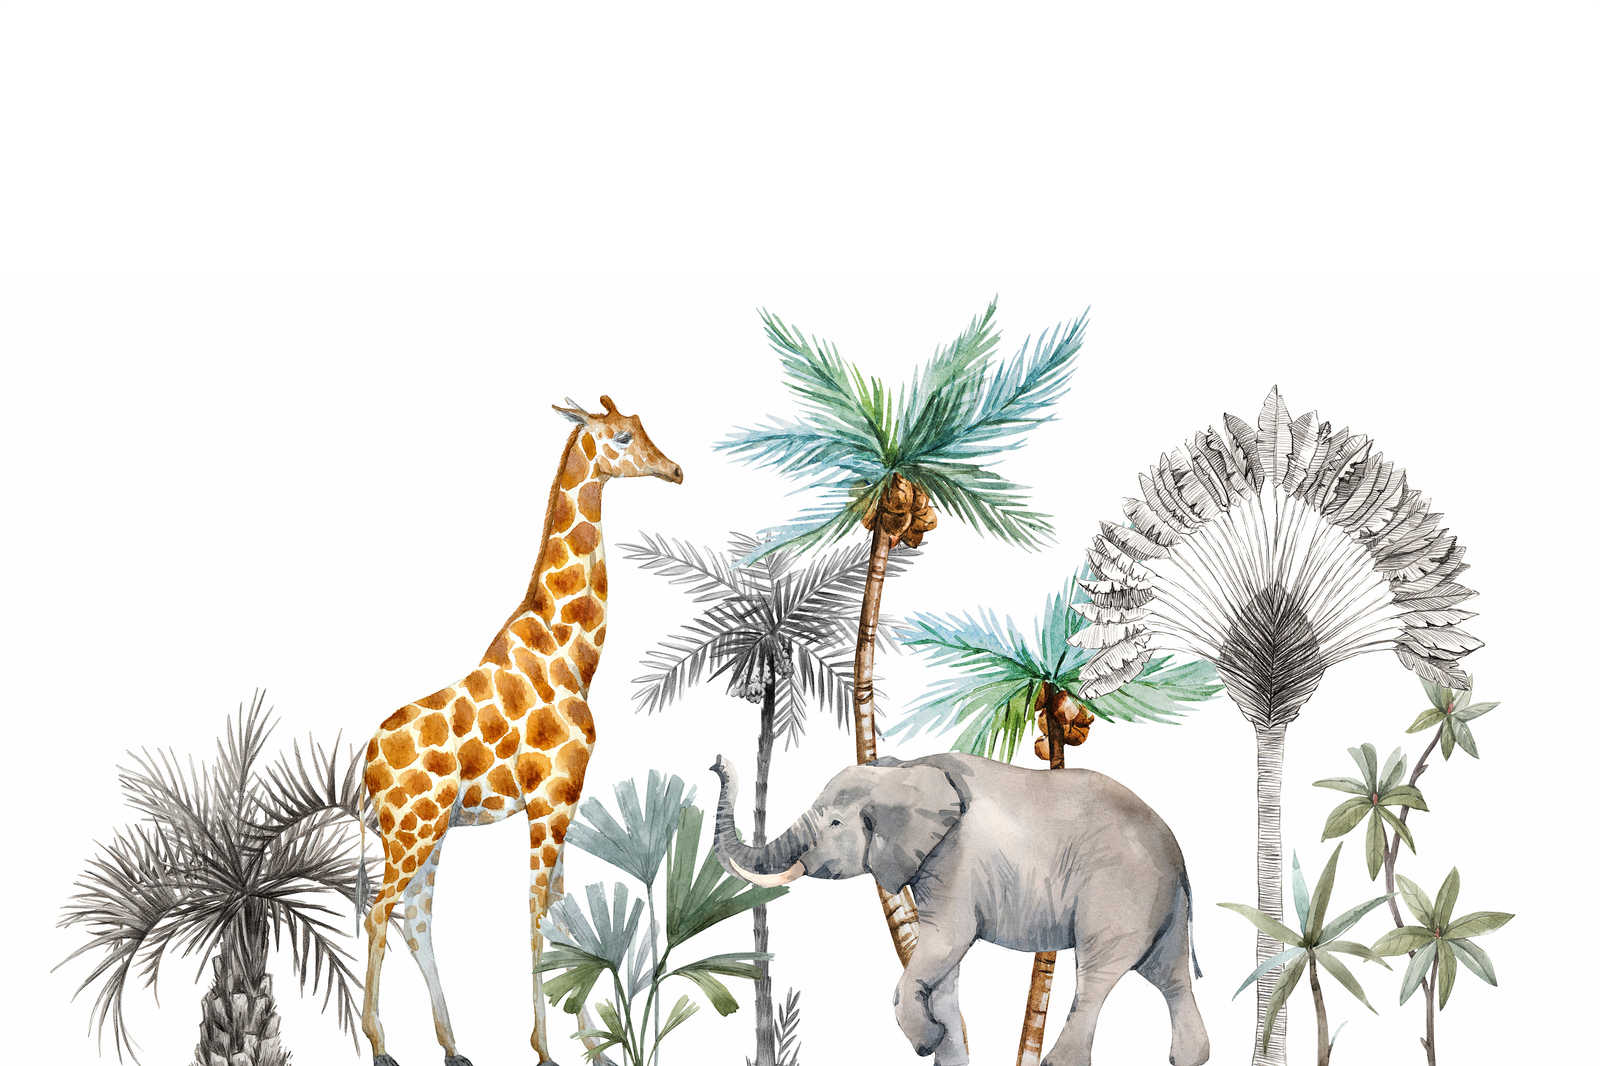             Canvas painting for the children's room with animals and trees - 0.90 m x 0.60 m
        